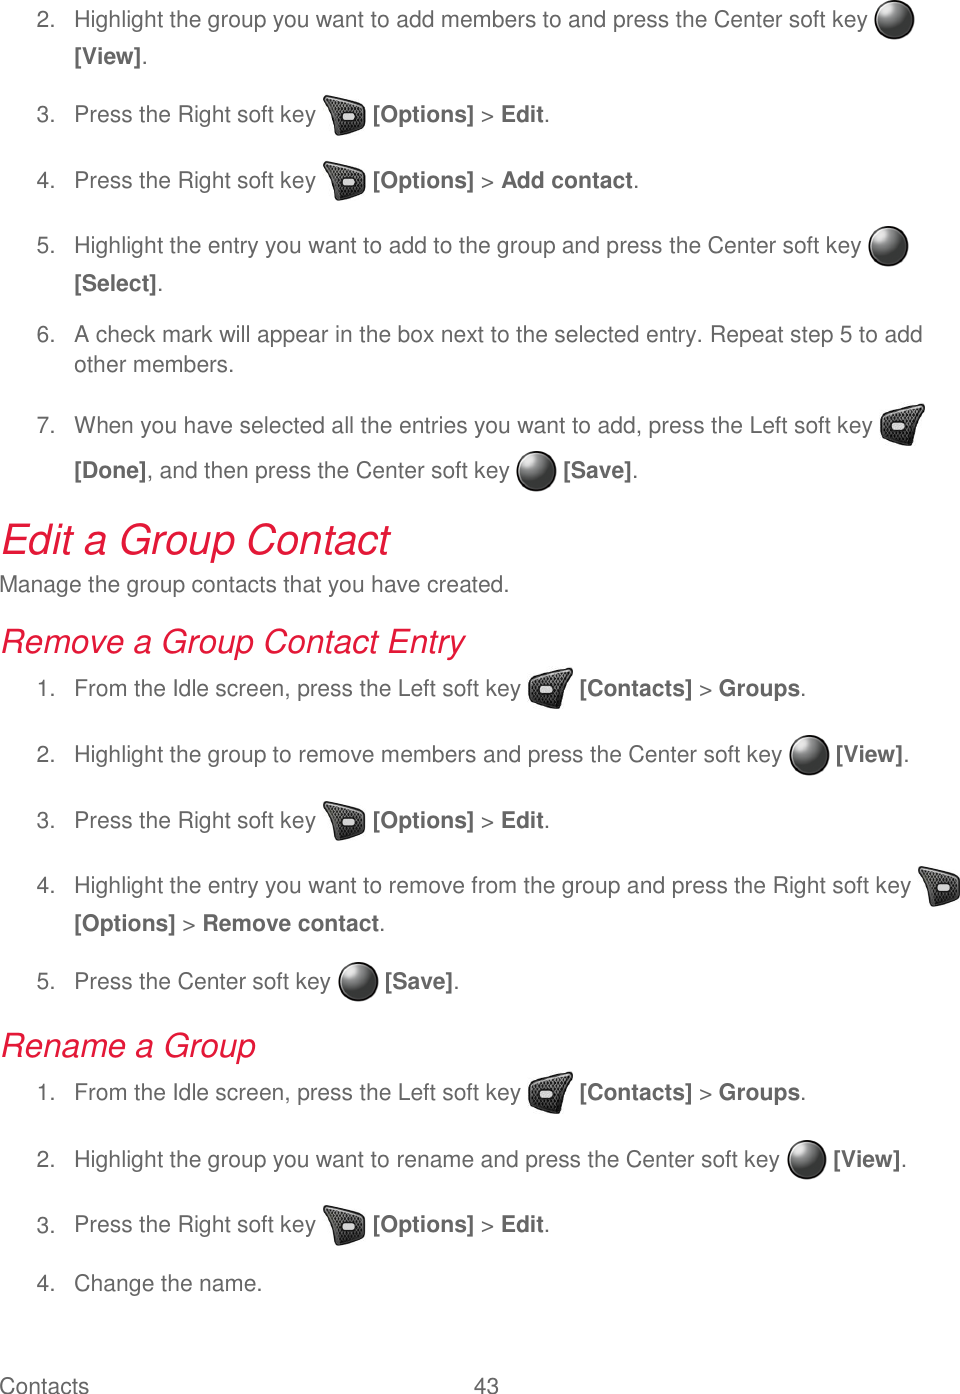 Contacts  43     Highlight the group you want to add members to and press the Center soft key   2.[View].   Press the Right soft key   [Options] &gt; Edit. 3.  Press the Right soft key   [Options] &gt; Add contact. 4.  Highlight the entry you want to add to the group and press the Center soft key   5.[Select].   A check mark will appear in the box next to the selected entry. Repeat step 5 to add 6.other members.   When you have selected all the entries you want to add, press the Left soft key   7.[Done], and then press the Center soft key   [Save]. Edit a Group Contact Manage the group contacts that you have created. Remove a Group Contact Entry   From the Idle screen, press the Left soft key   [Contacts] &gt; Groups. 1.  Highlight the group to remove members and press the Center soft key   [View]. 2.  Press the Right soft key   [Options] &gt; Edit. 3.  Highlight the entry you want to remove from the group and press the Right soft key   4.[Options] &gt; Remove contact.   Press the Center soft key   [Save]. 5.Rename a Group   From the Idle screen, press the Left soft key   [Contacts] &gt; Groups. 1.  Highlight the group you want to rename and press the Center soft key   [View]. 2.  Press the Right soft key   [Options] &gt; Edit. 3.  Change the name. 4.